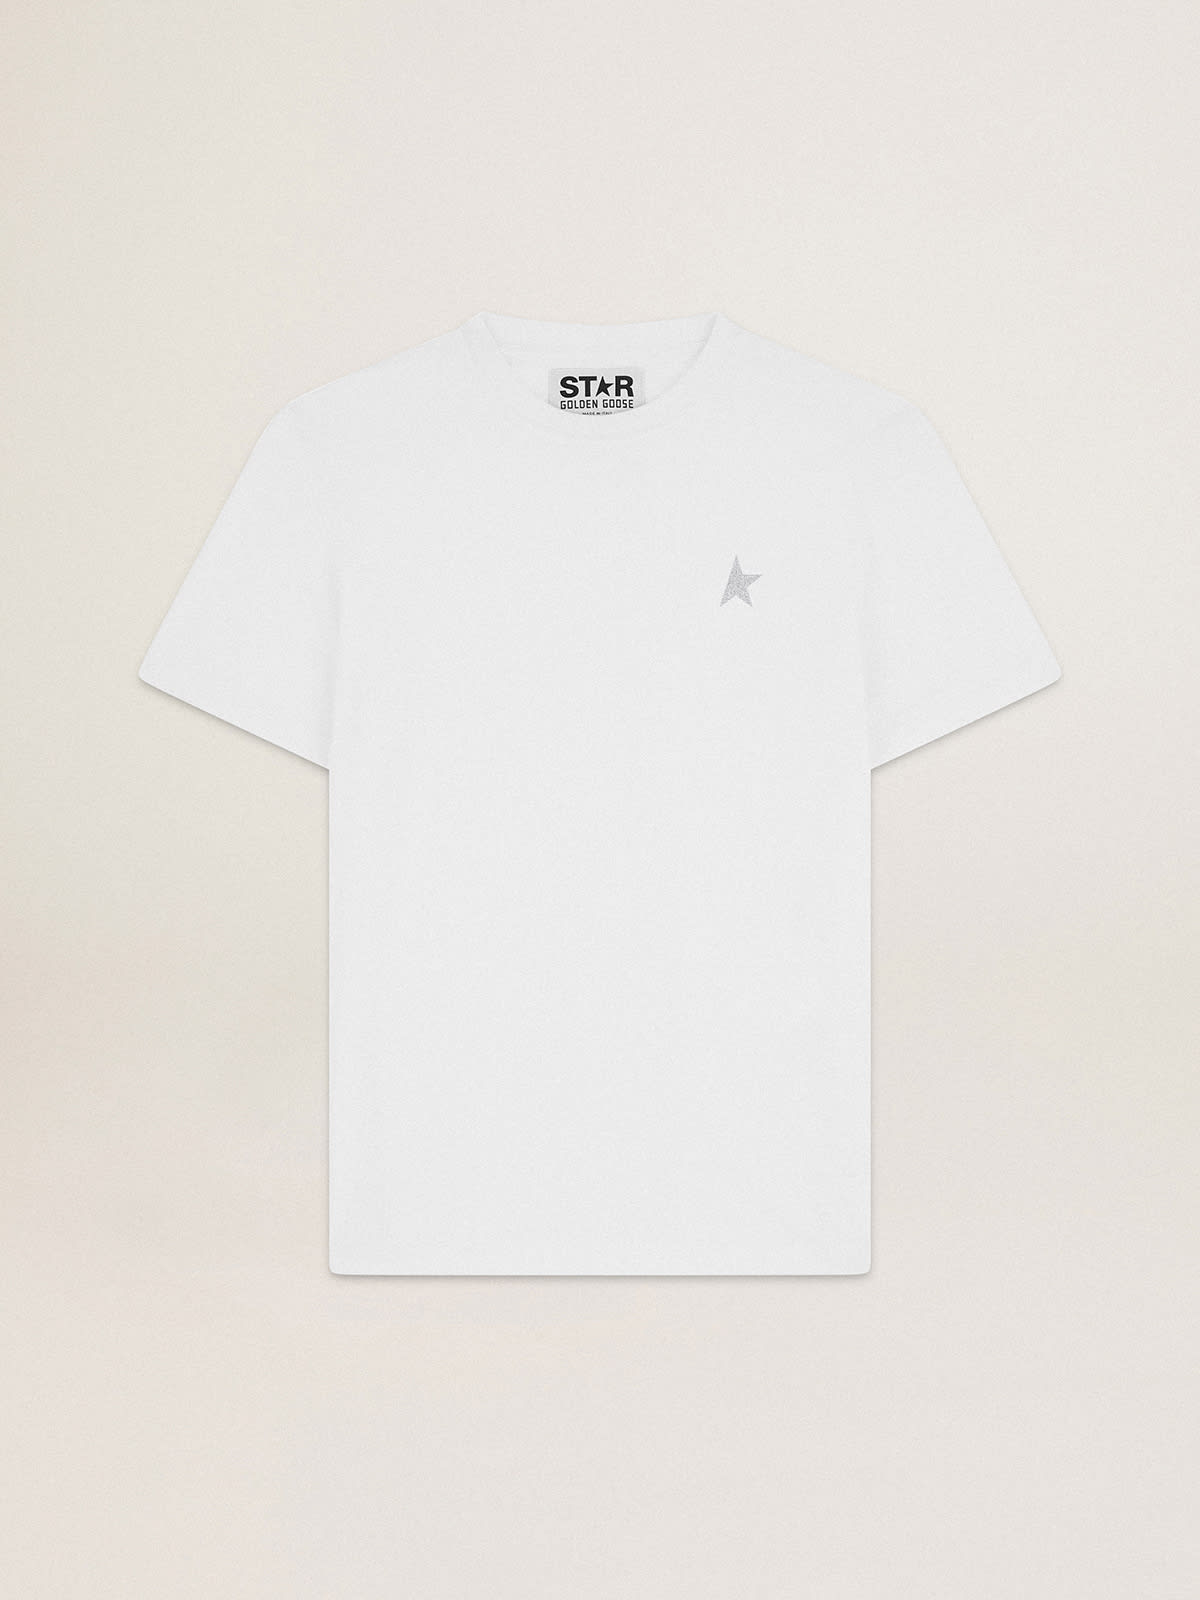 Golden Goose - Men's white T-shirt with silver glitter star on the front in 